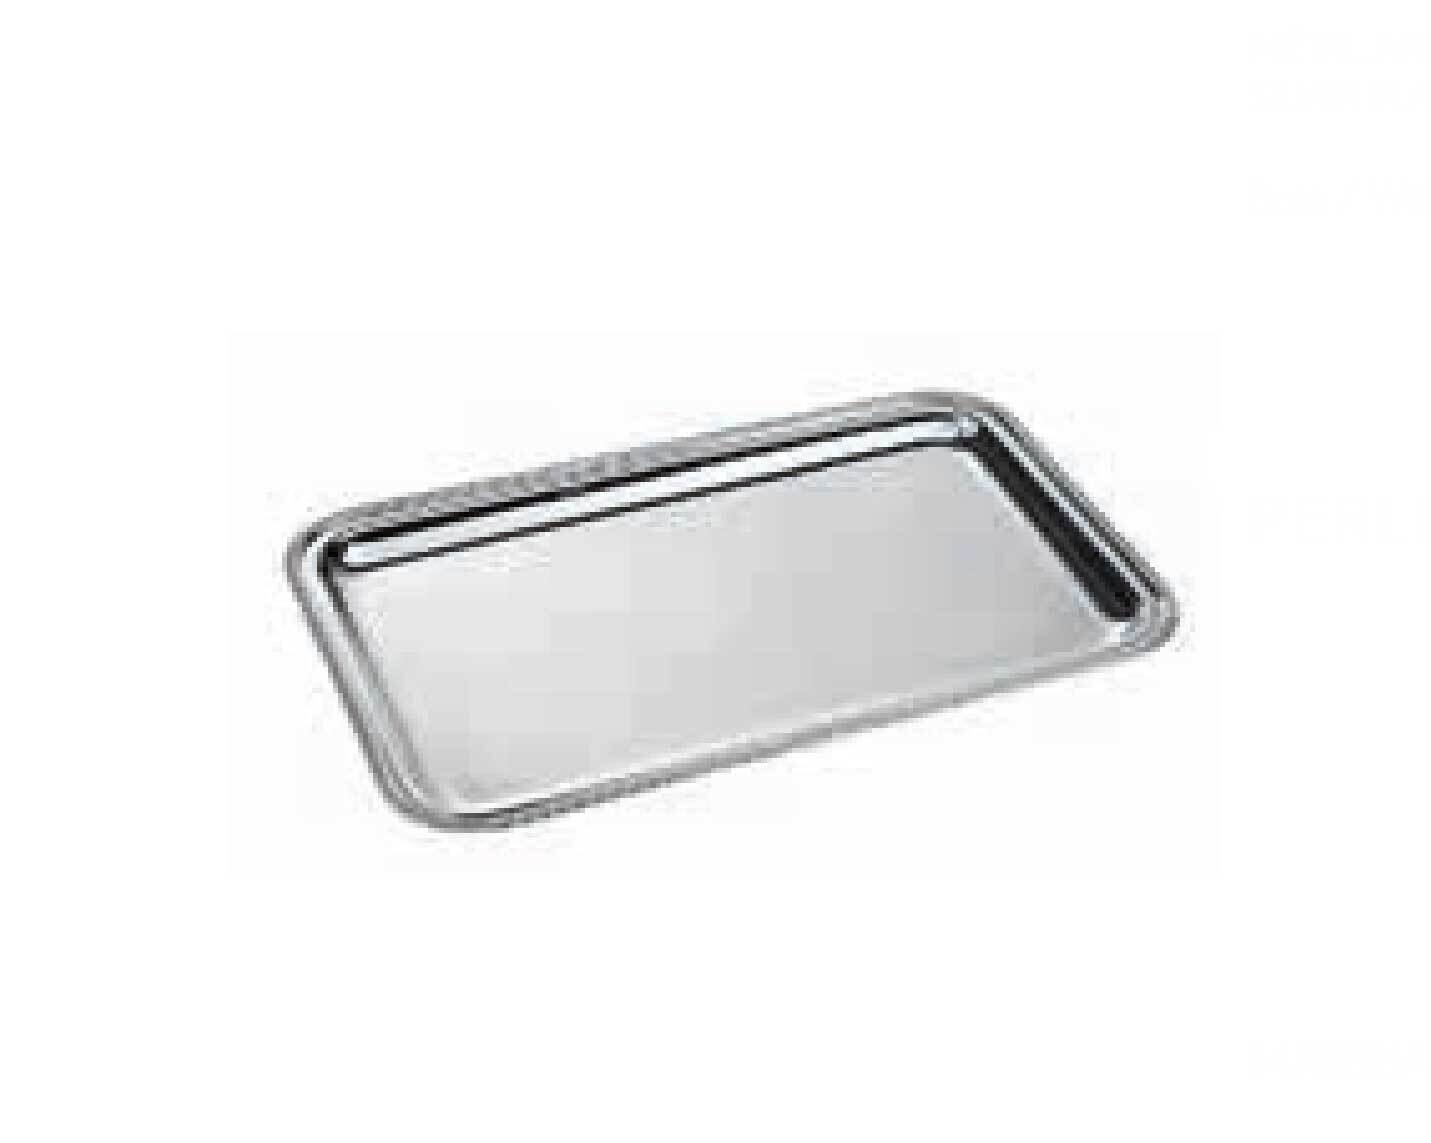 Ercuis Perles Rectangular Serving Tray 19.625 x 15 Inch Silver Plated F51P451-50